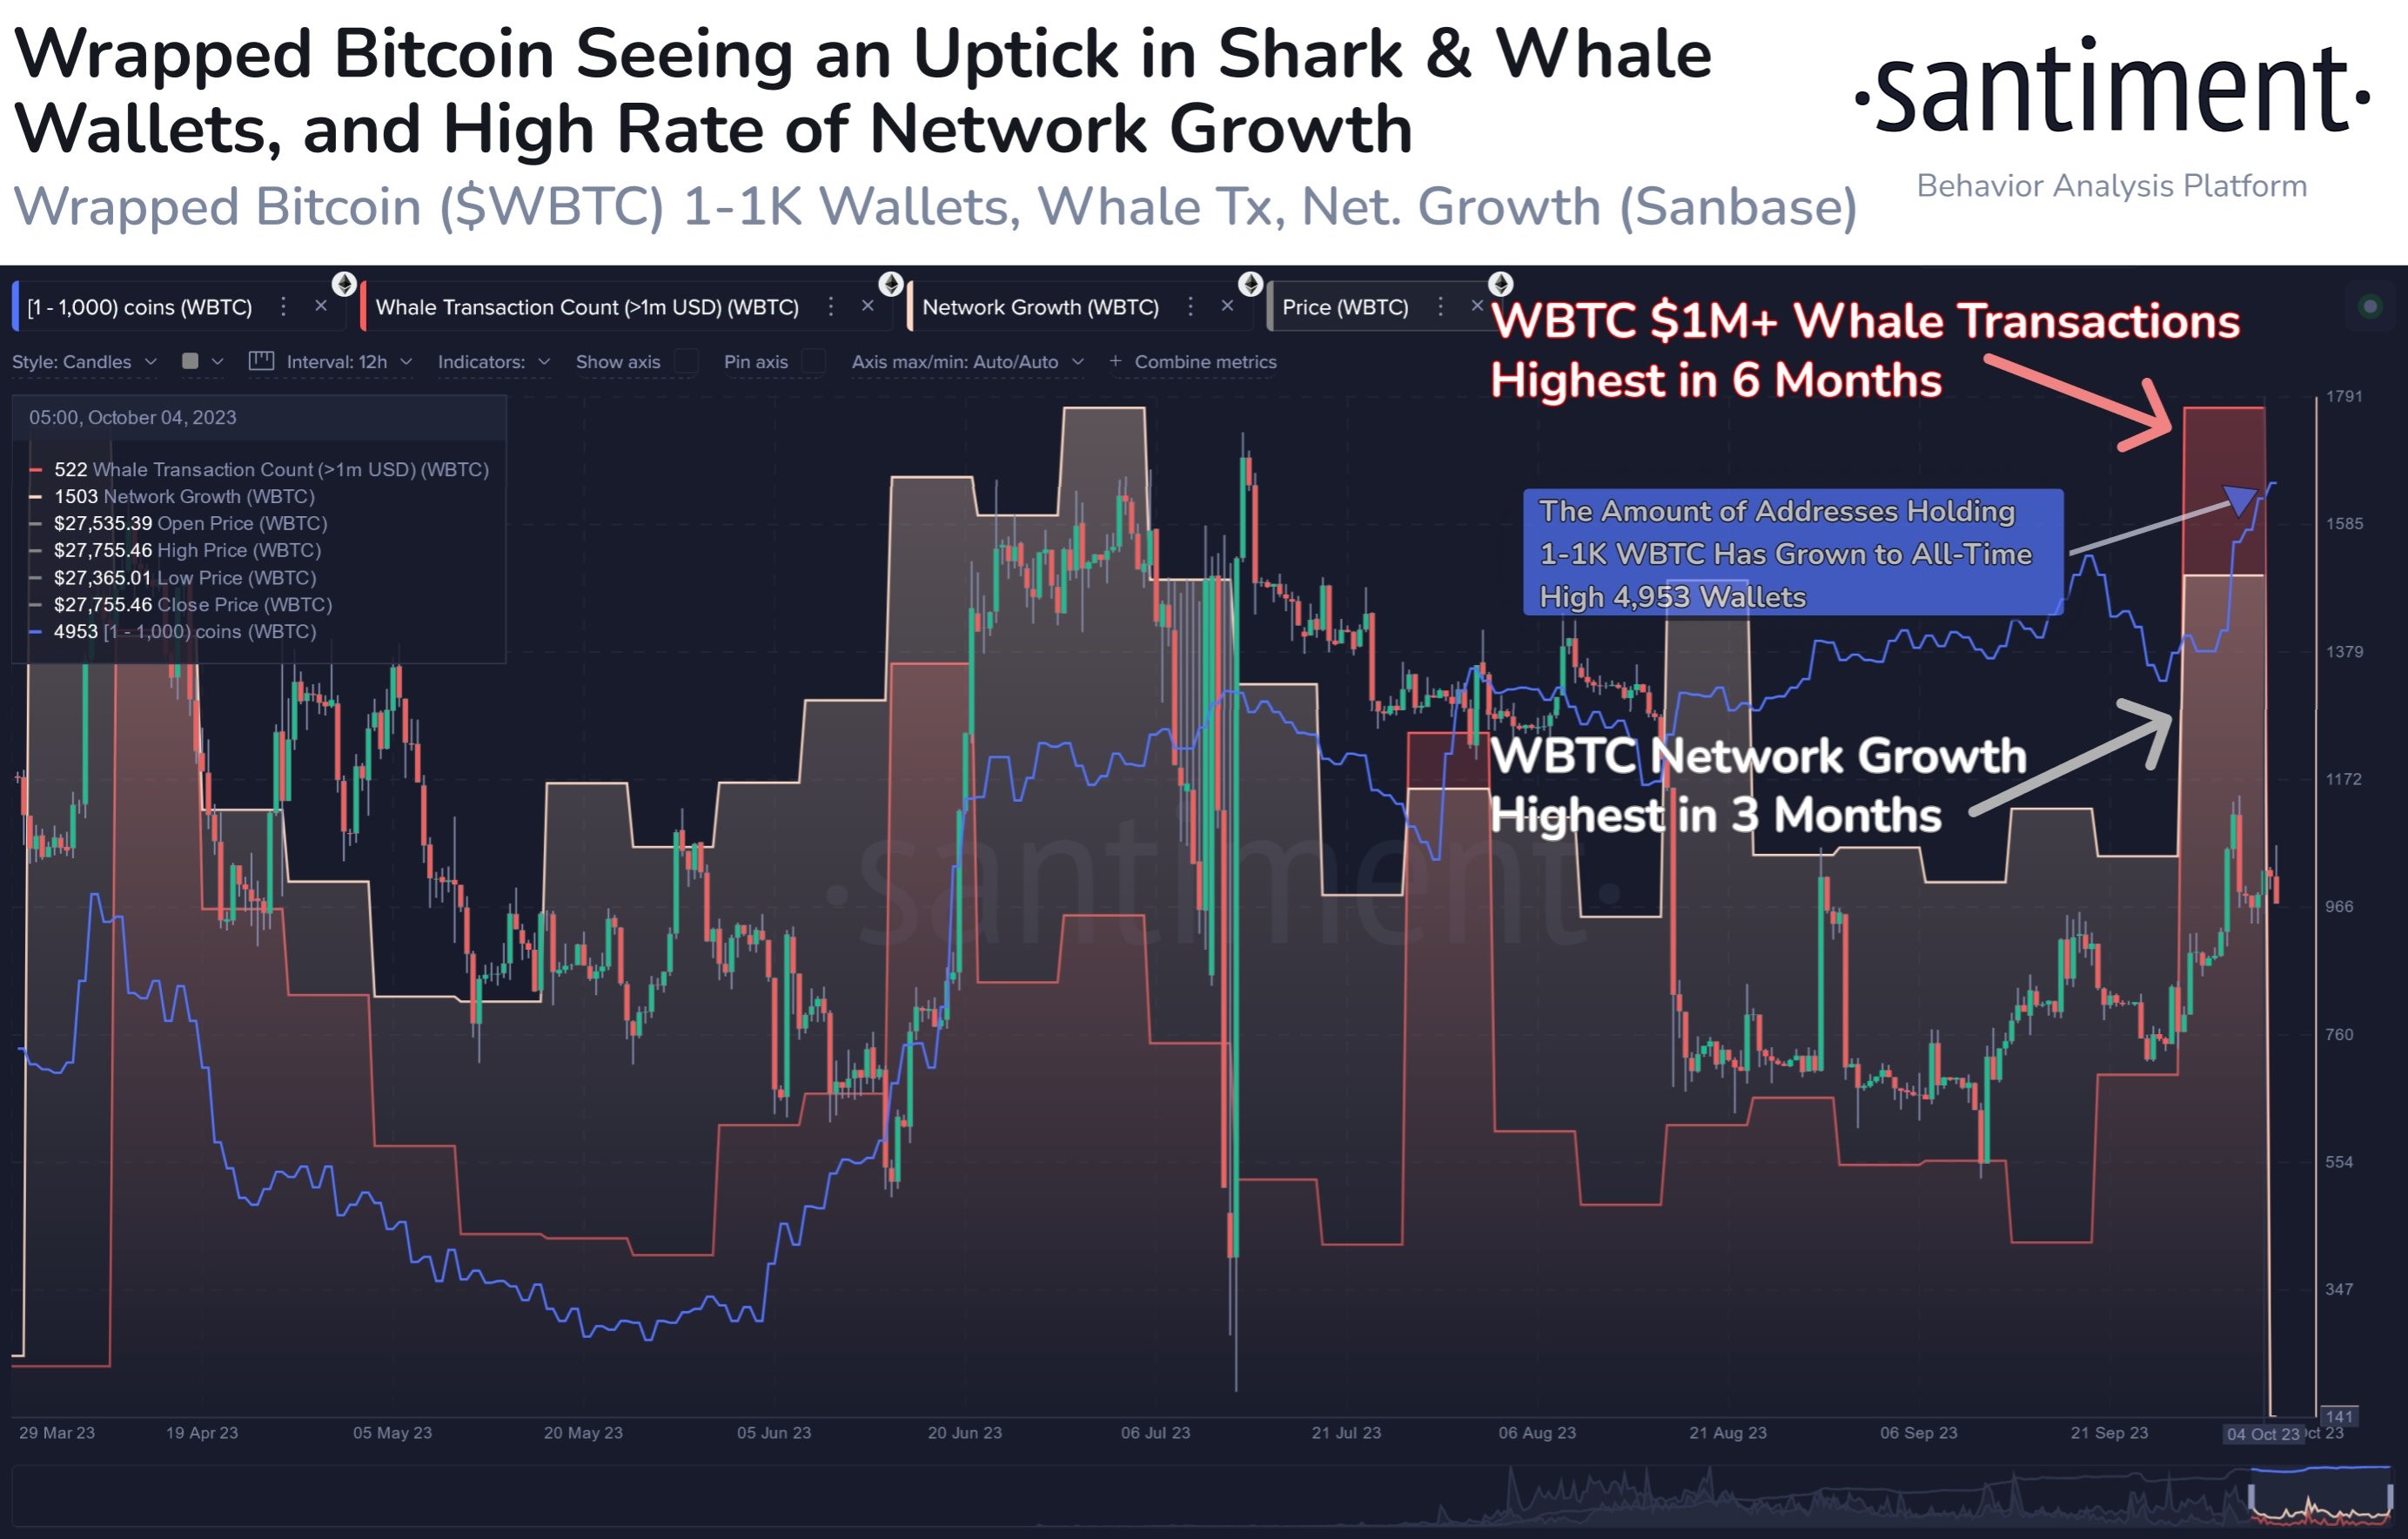 Market research report: BTC proves its mettle as safe haven amid unwinding of traditional market assets - wBTC